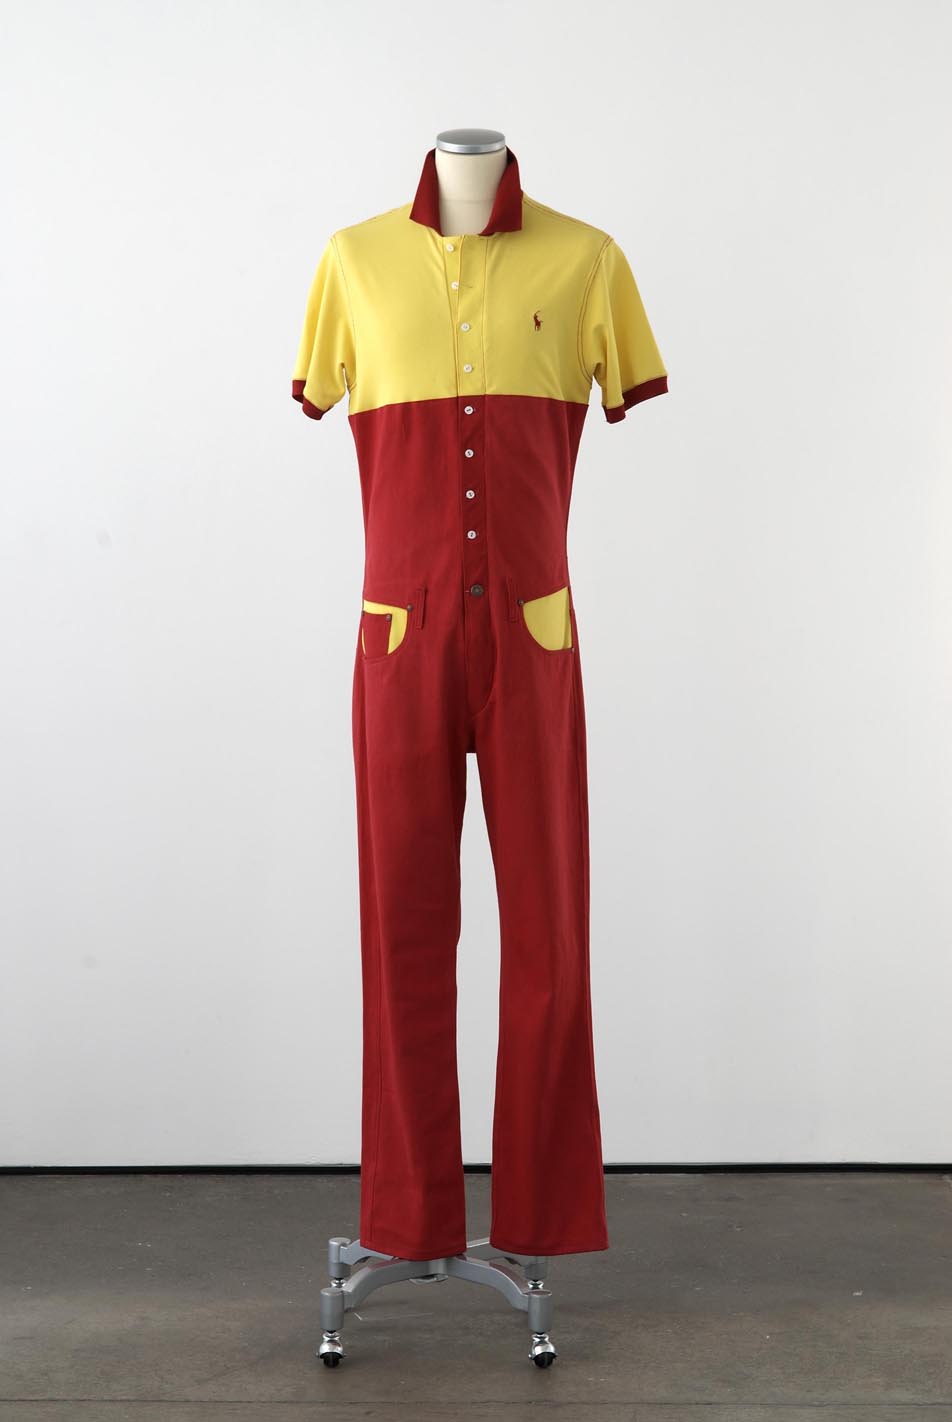     Matthew Darbyshire Standardised Production Clothing, Version 2 2009 Red denim, yellow airtex &amp; fittings on mannequin 185 x 45 x 34 cm 